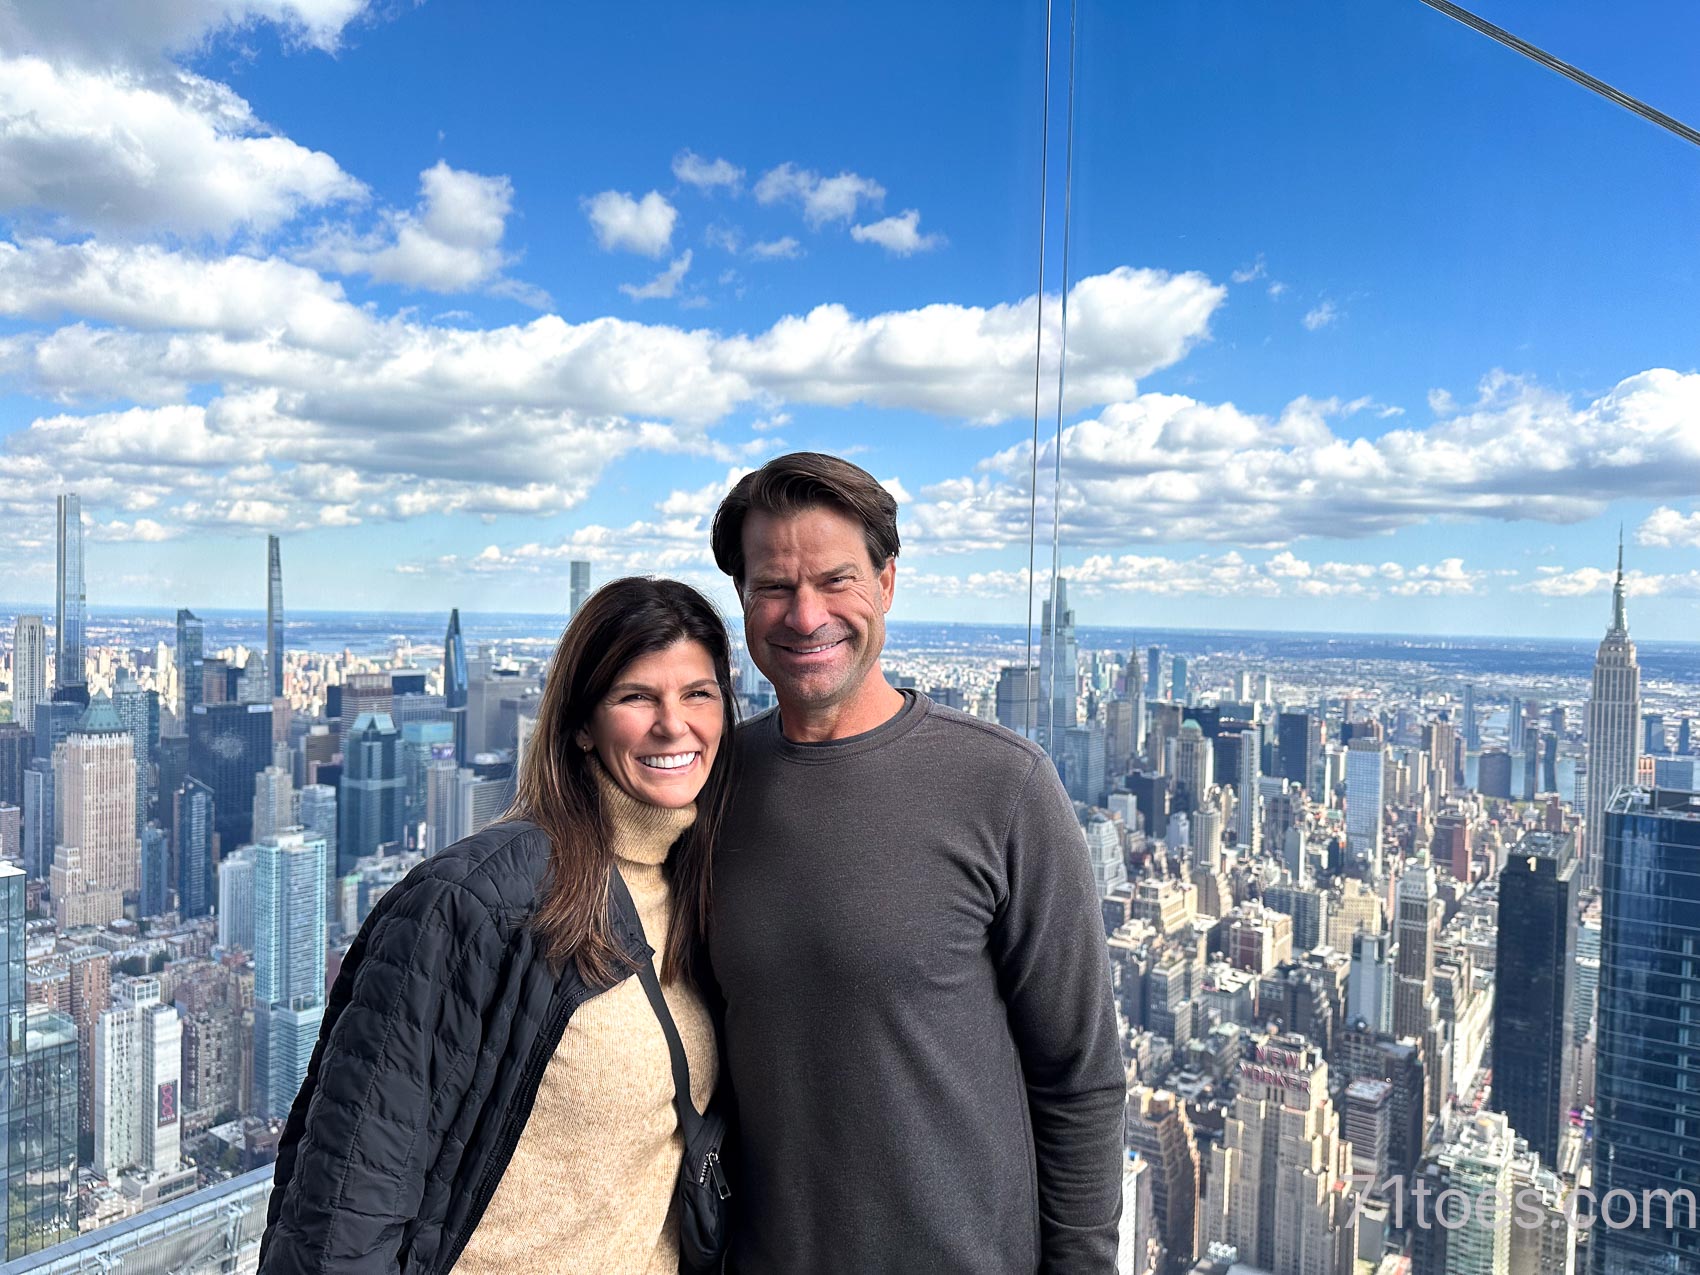 Shawni and Dave on "The Edge" in New York City